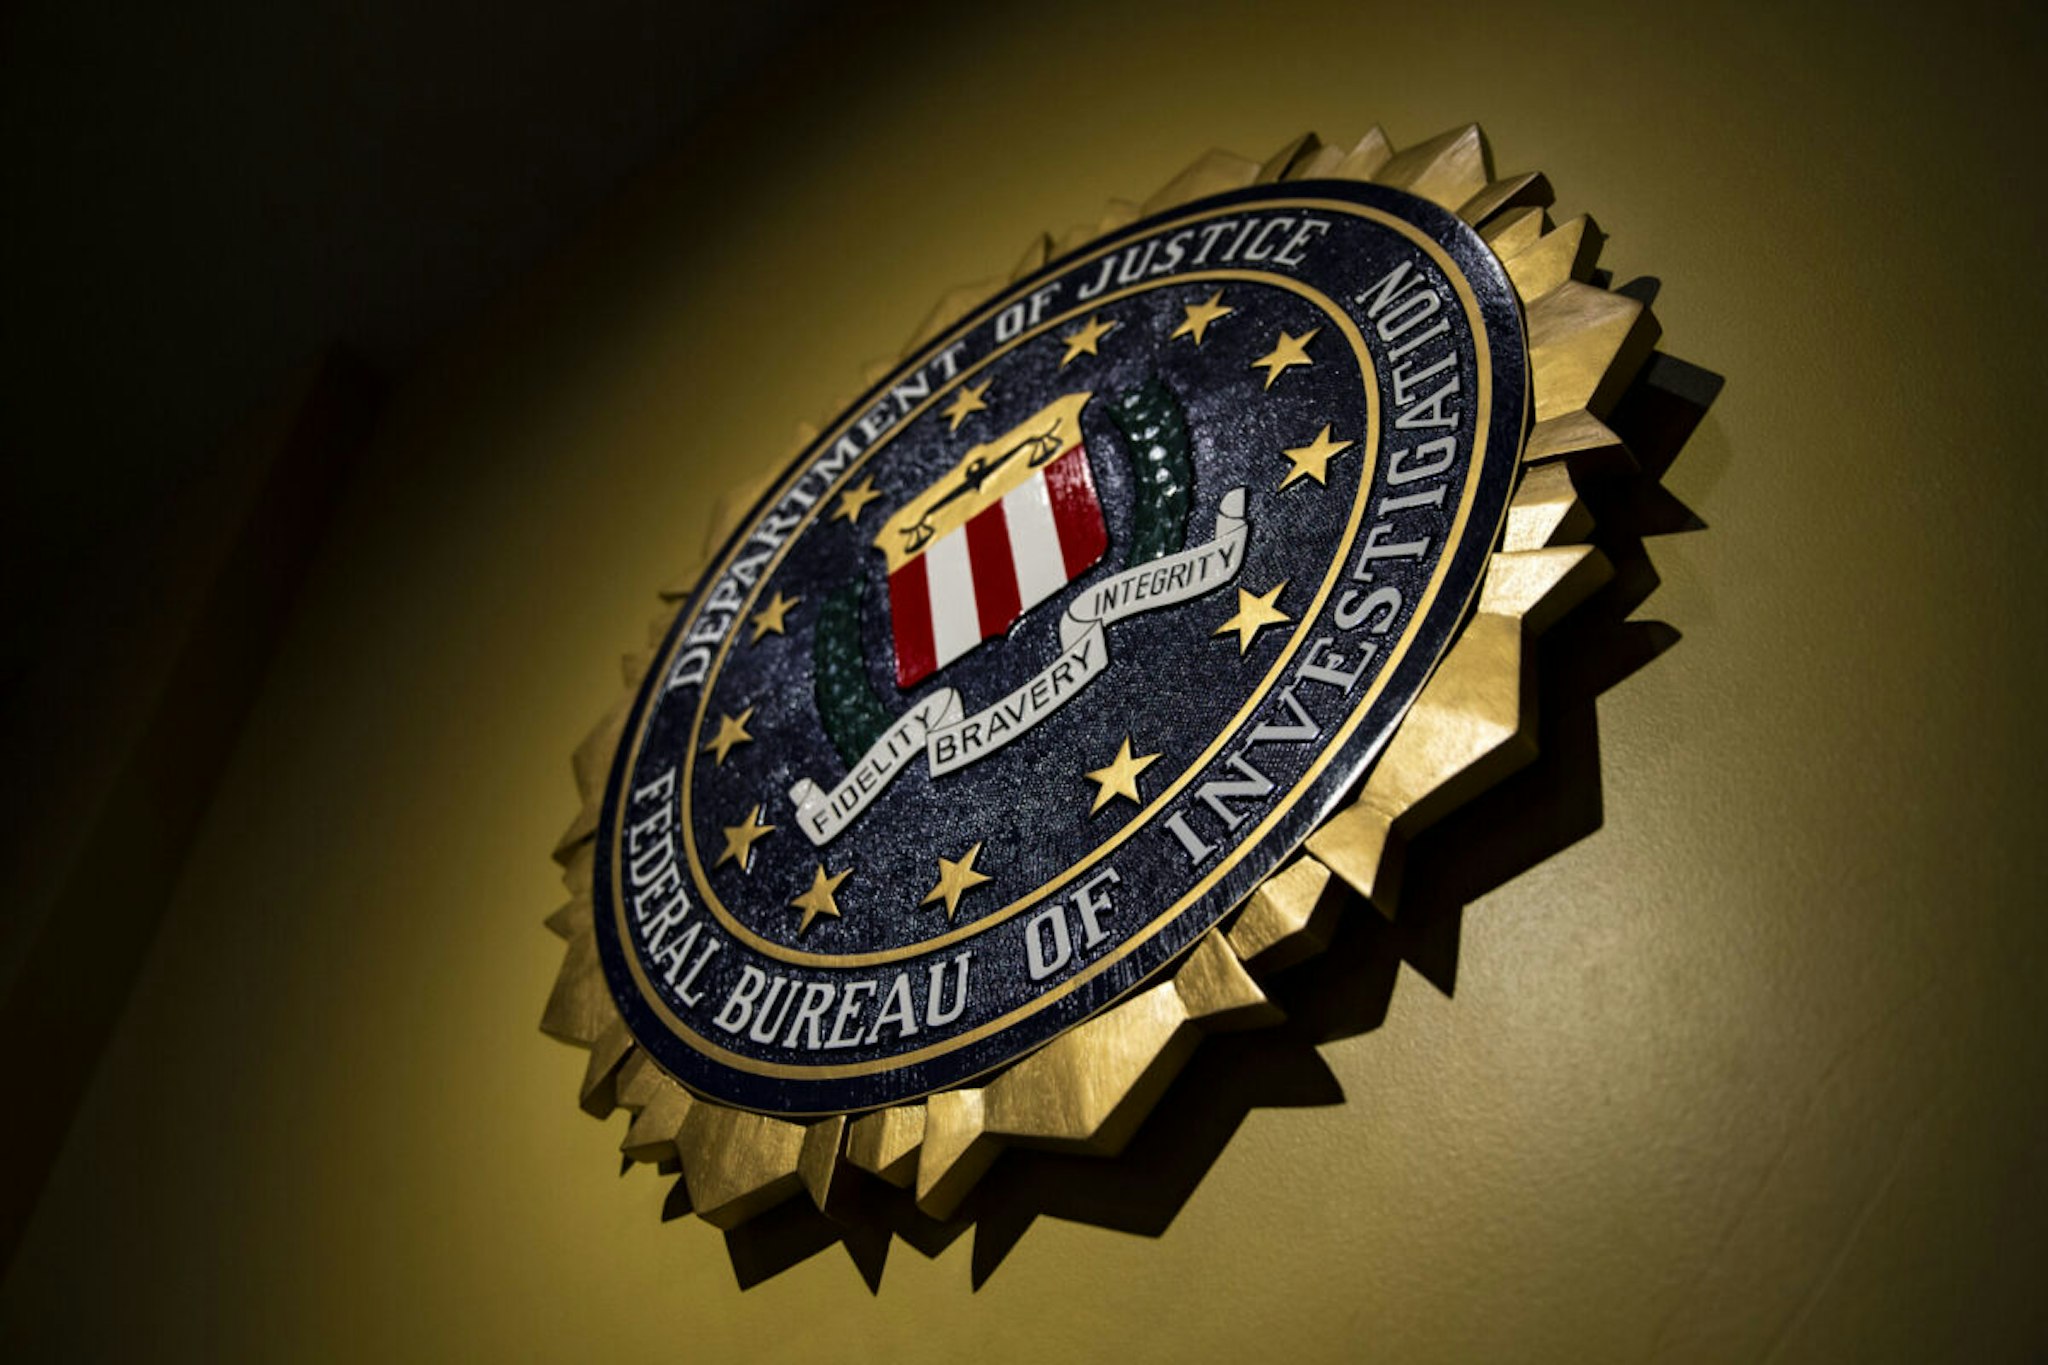 The seal of the Federal Bureau of Investigation (FBI) hangs on a wall before a news conference at the FBI headquarters in Washington, D.C., U.S., on Thursday, June 14, 2018. Former FBI Director James Comey was "insubordinate" in handling the probe into Hillary Clinton, damaging the bureau and the Justice Department's image of impartiality even though he wasn't motivated by politics, the department's watchdog said today.